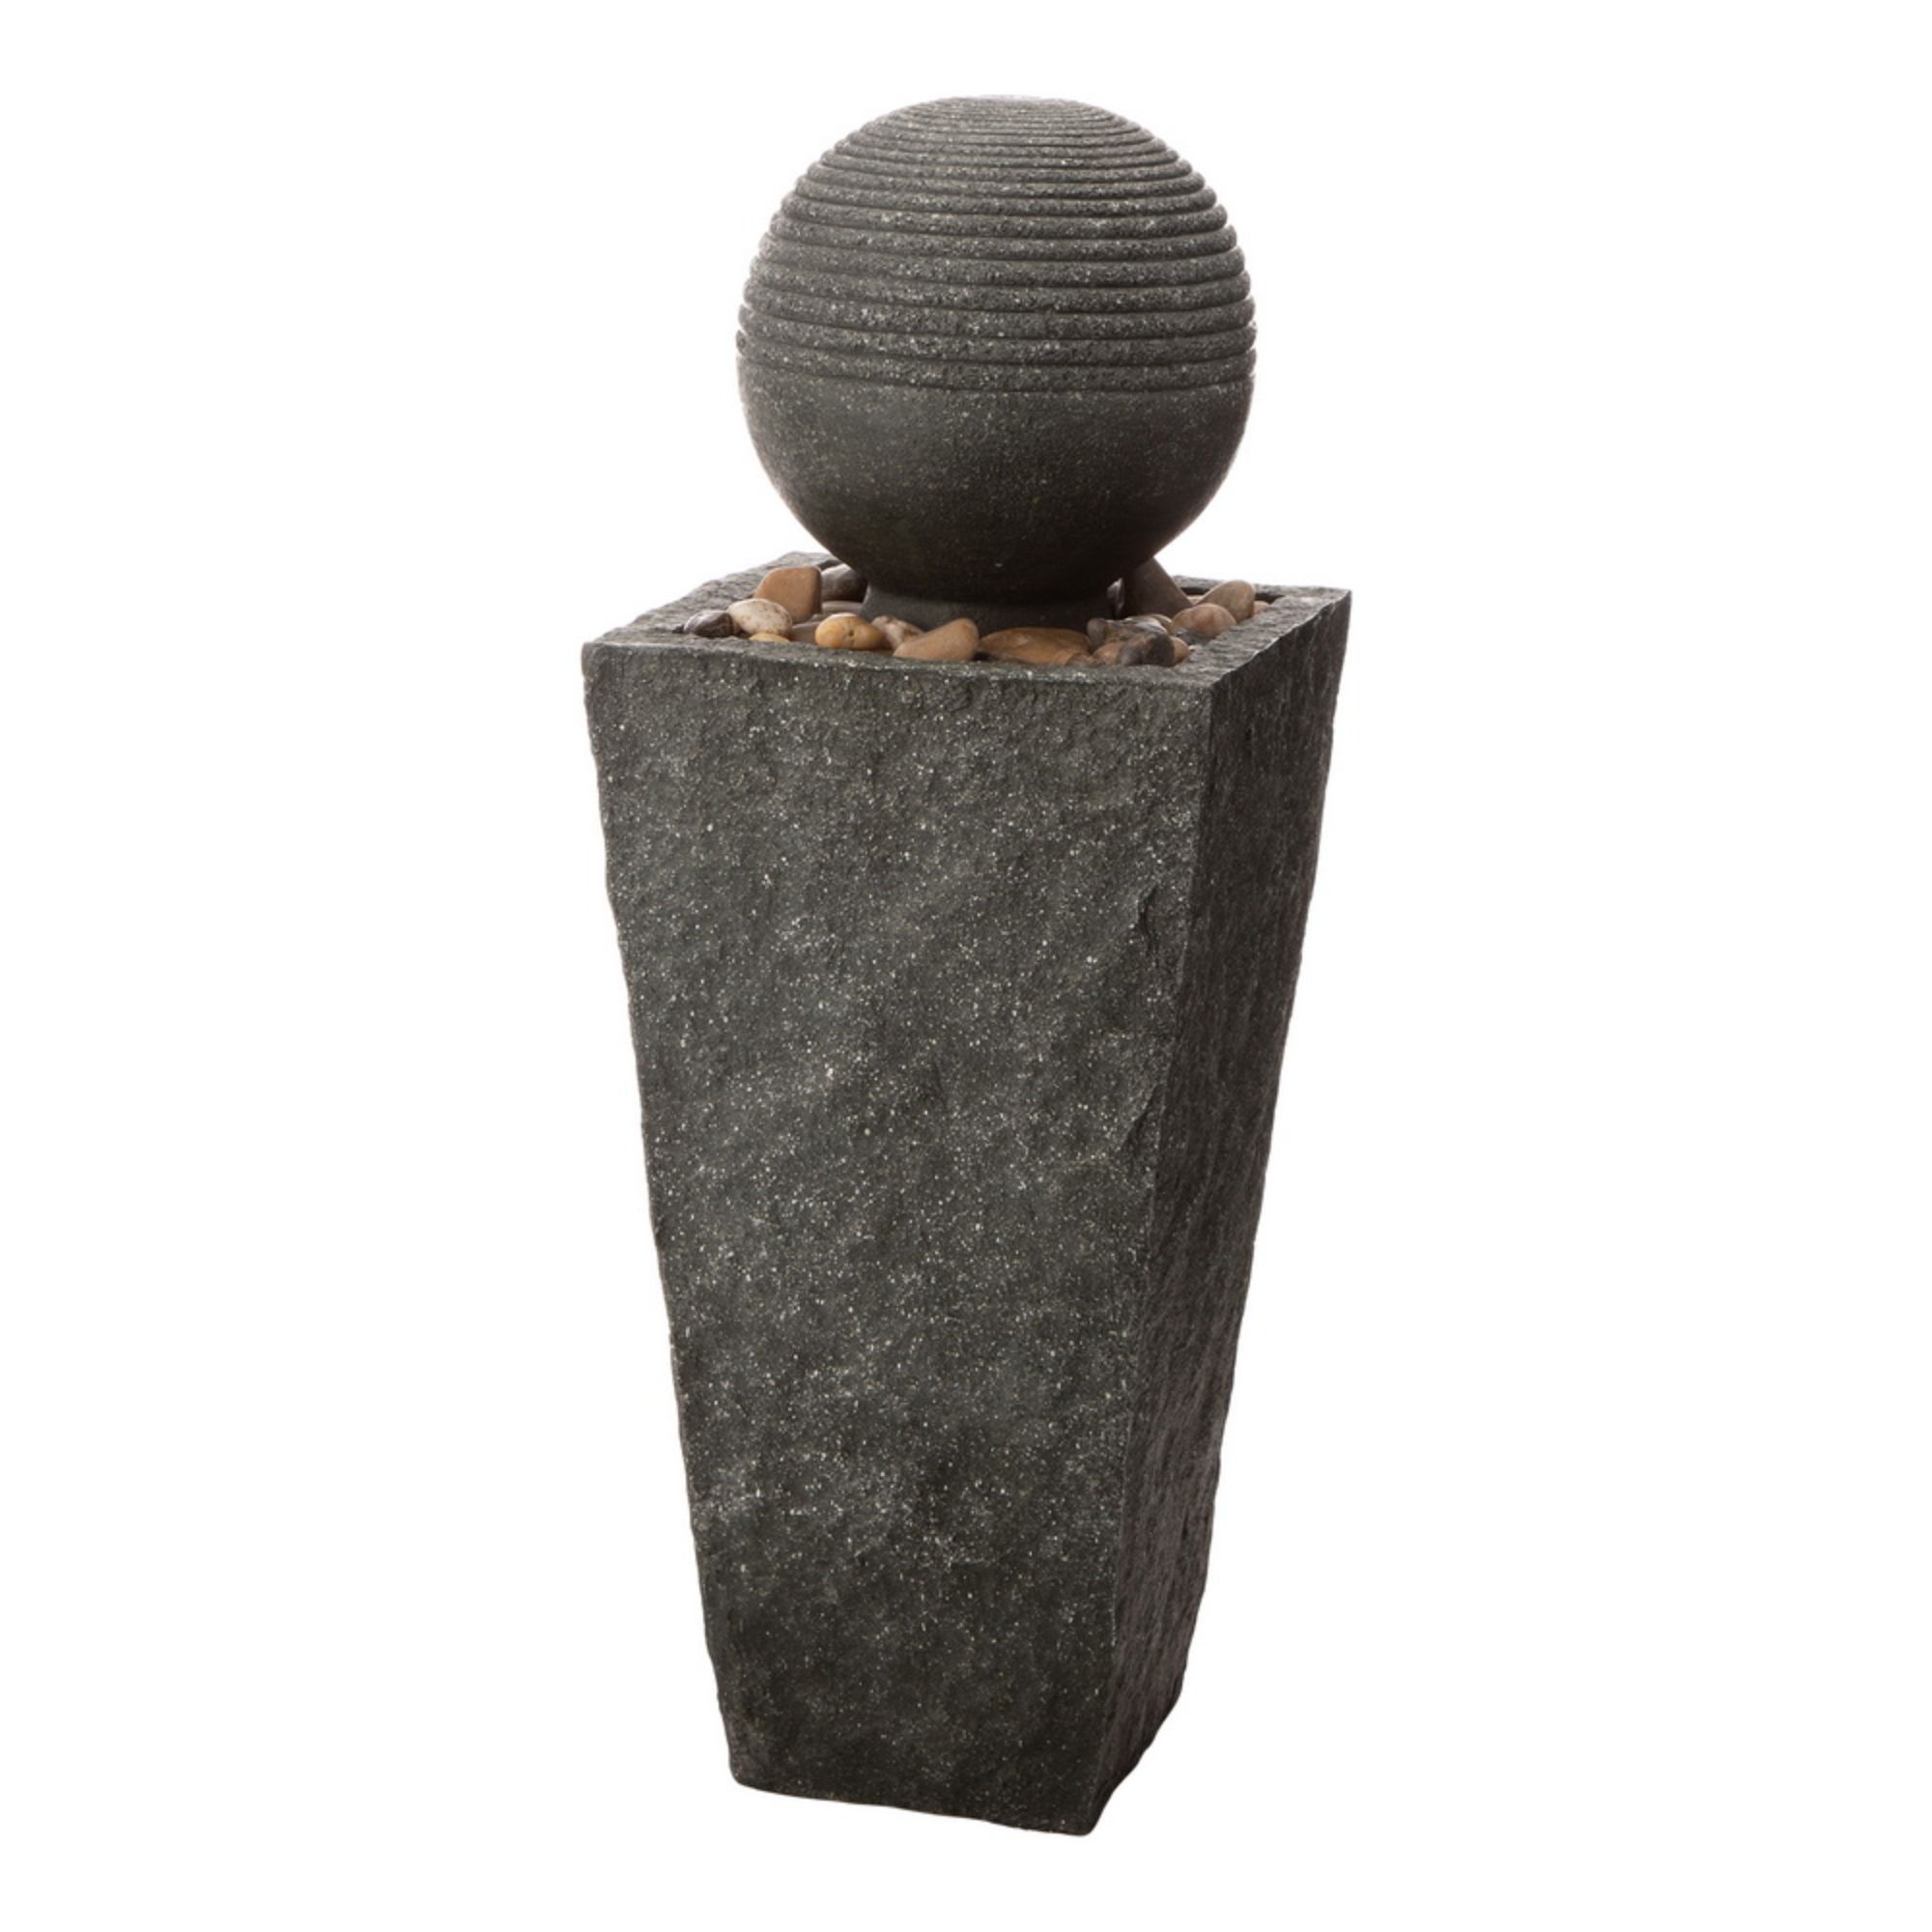 Glitzhome 31.5" Gray and White Rippling Floating Sphere Outdoor Garden Pedestal Fountain with LED Light